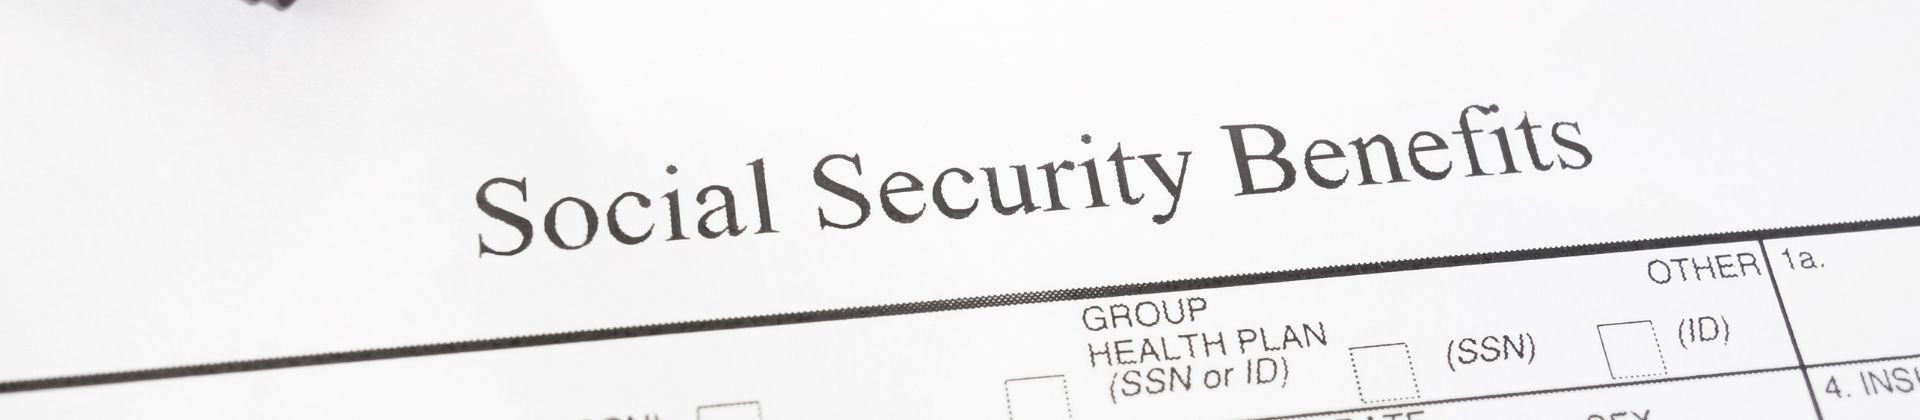 Claim form to apply for Social Security Benefits